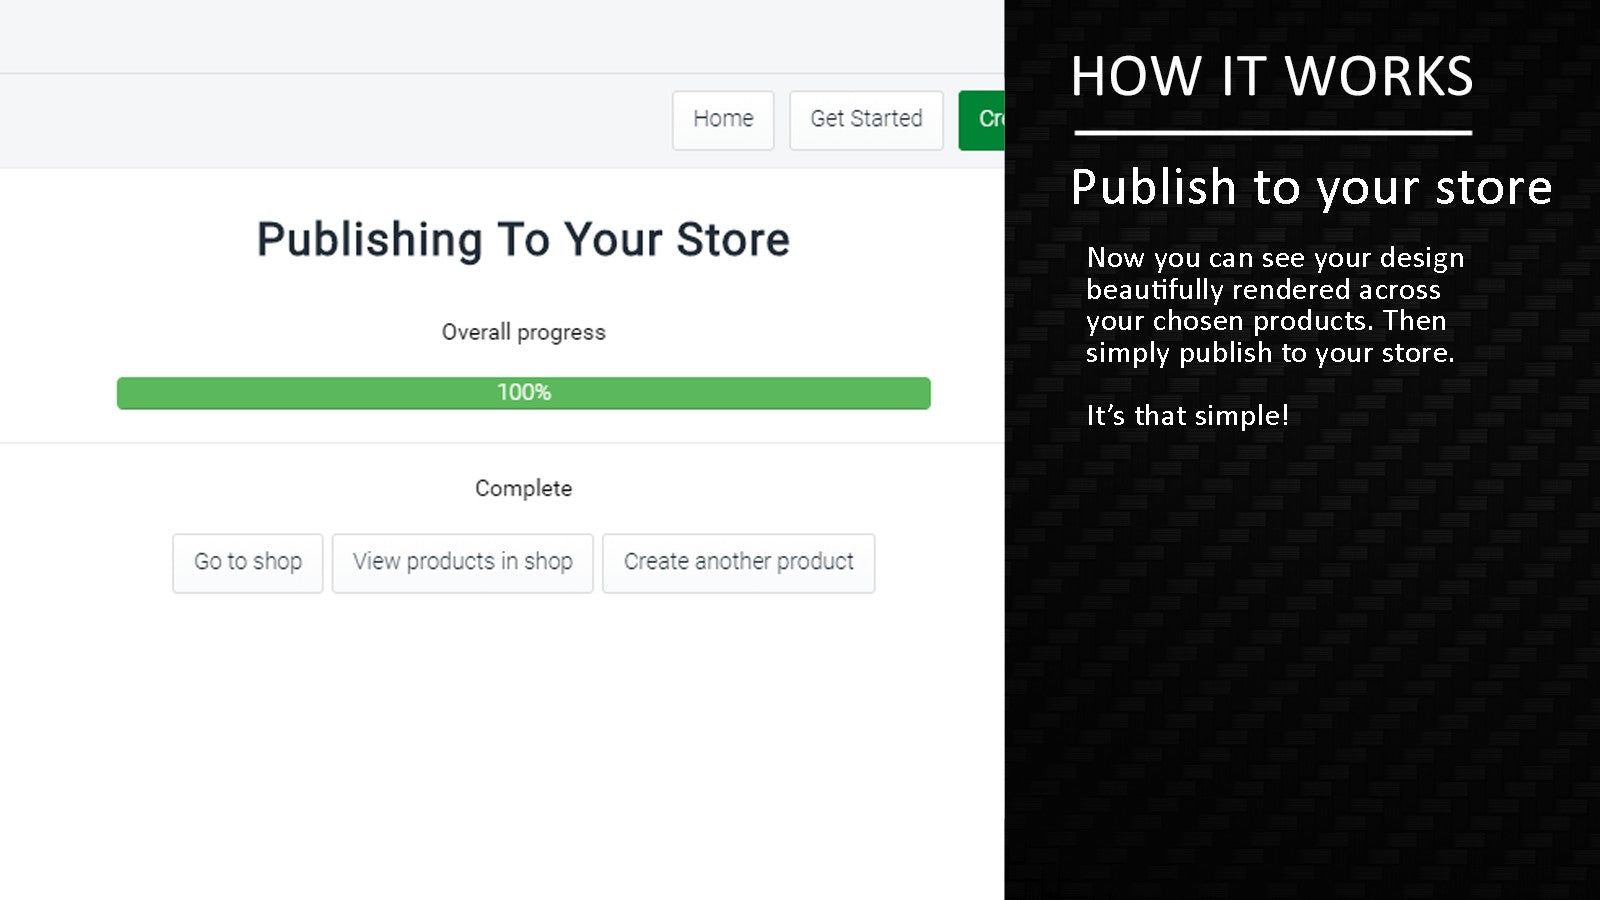 Publishing to your store